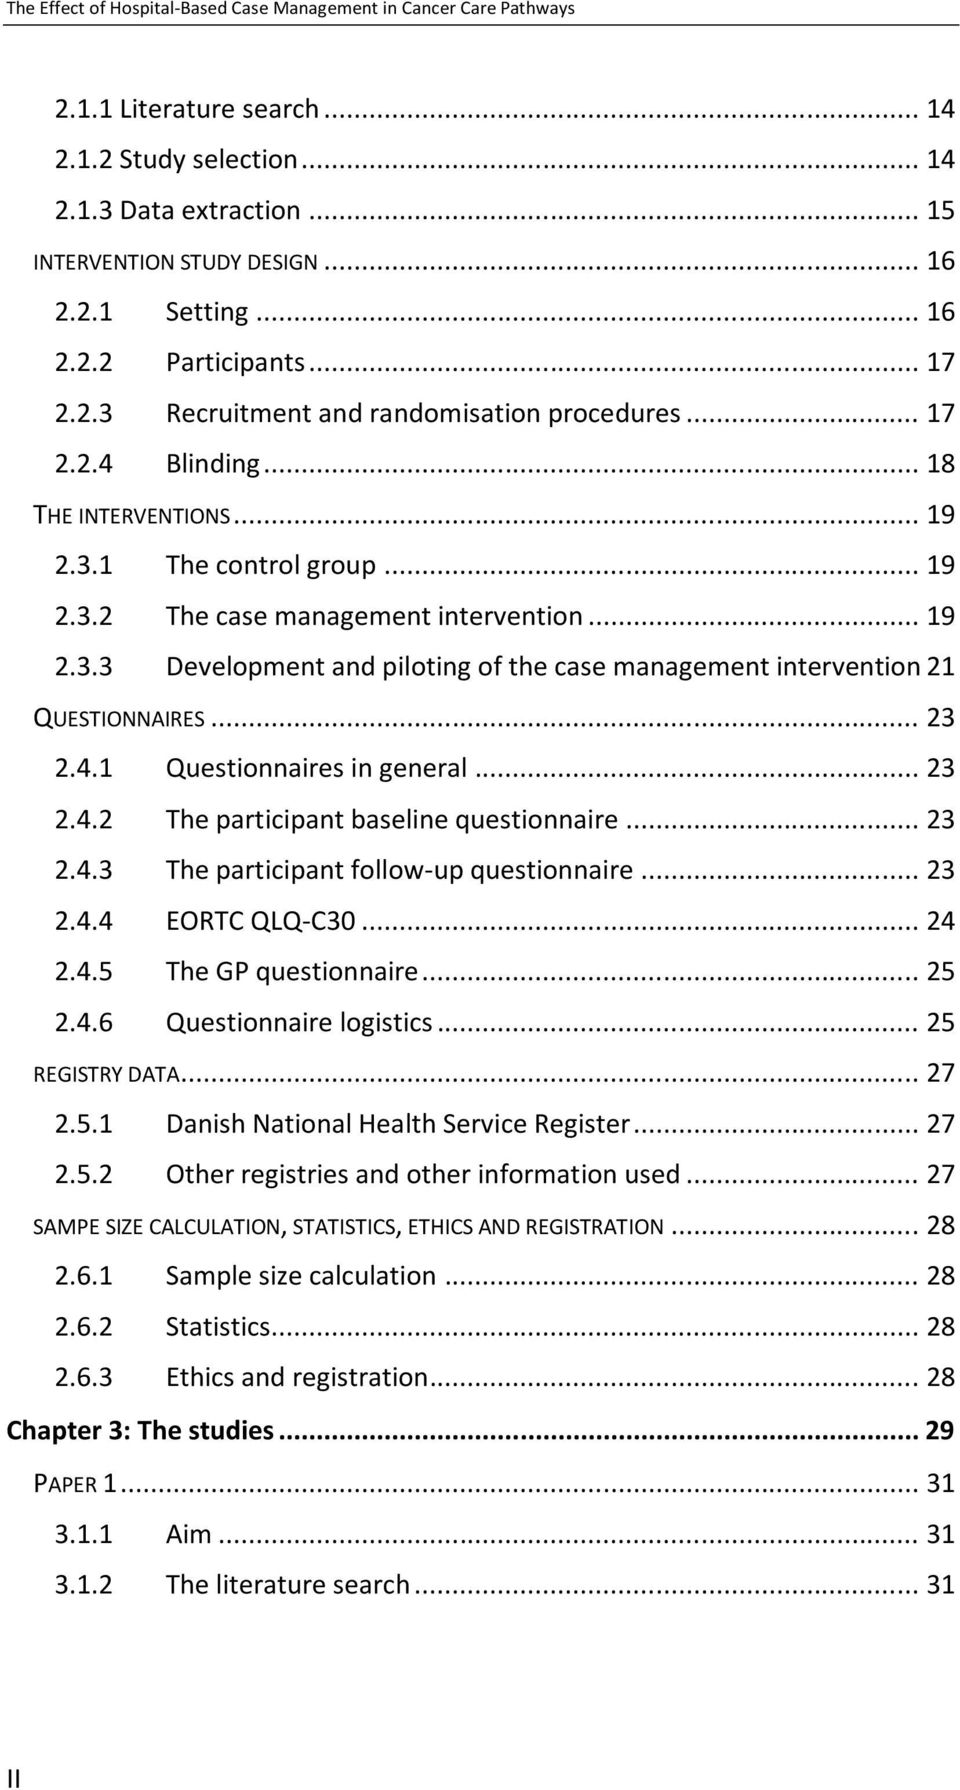 .. 19 2.3.3 Development and piloting of the case management intervention 21 QUESTIONNAIRES... 23 2.4.1 Questionnaires in general... 23 2.4.2 The participant baseline questionnaire... 23 2.4.3 The participant follow-up questionnaire.